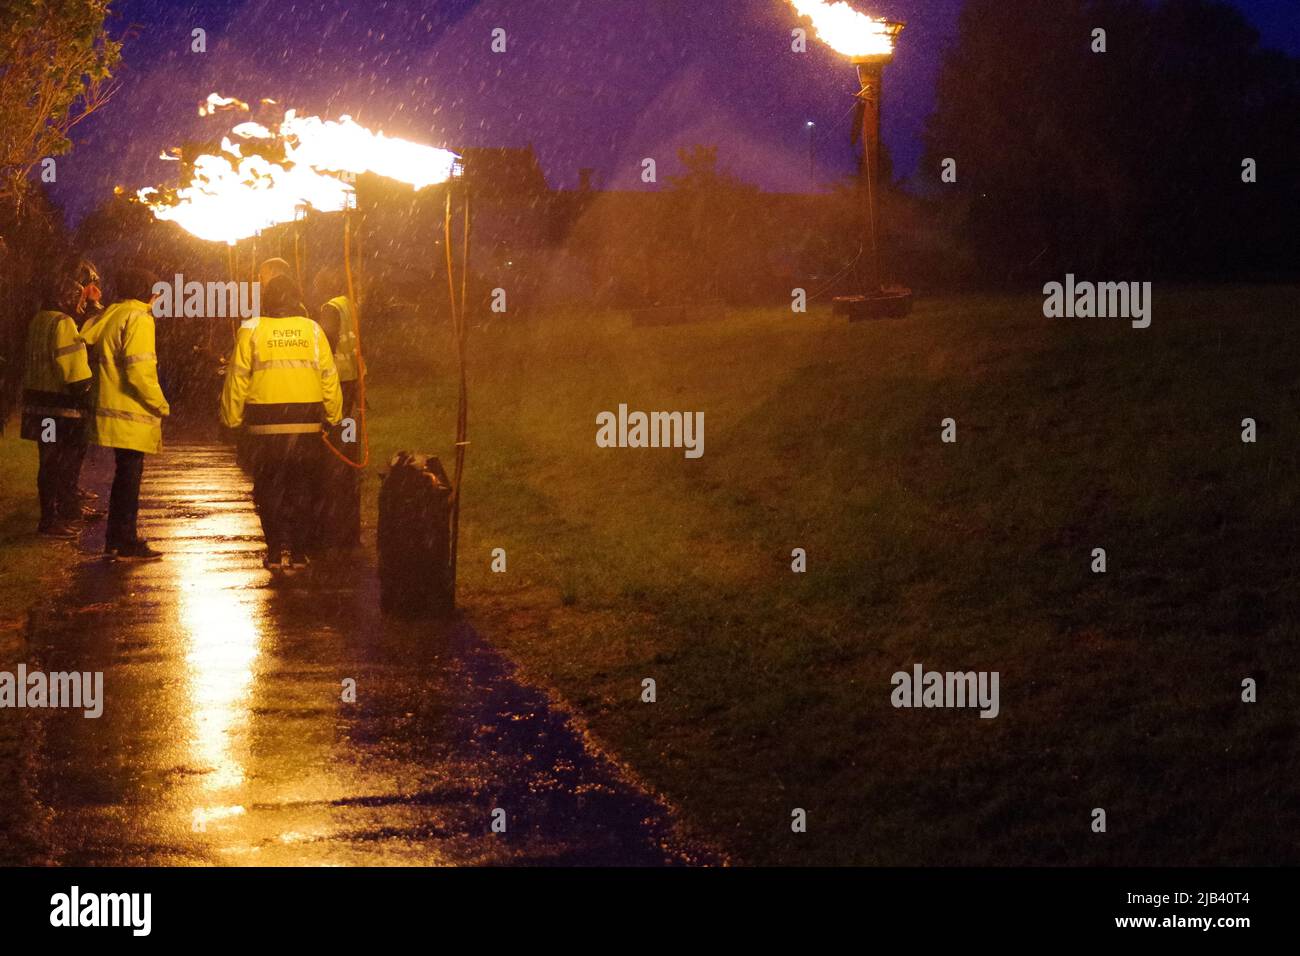 Wallsend, England, 2 June 2022. Seven beacons, including a huge steel brazier standing four metres high manufactured by local company Smulders, after being lit at Segedunum Roman Fort during the Queen’s Platinum Jubilee event. Credit: Colin Edwards / Alamy Live News Stock Photo